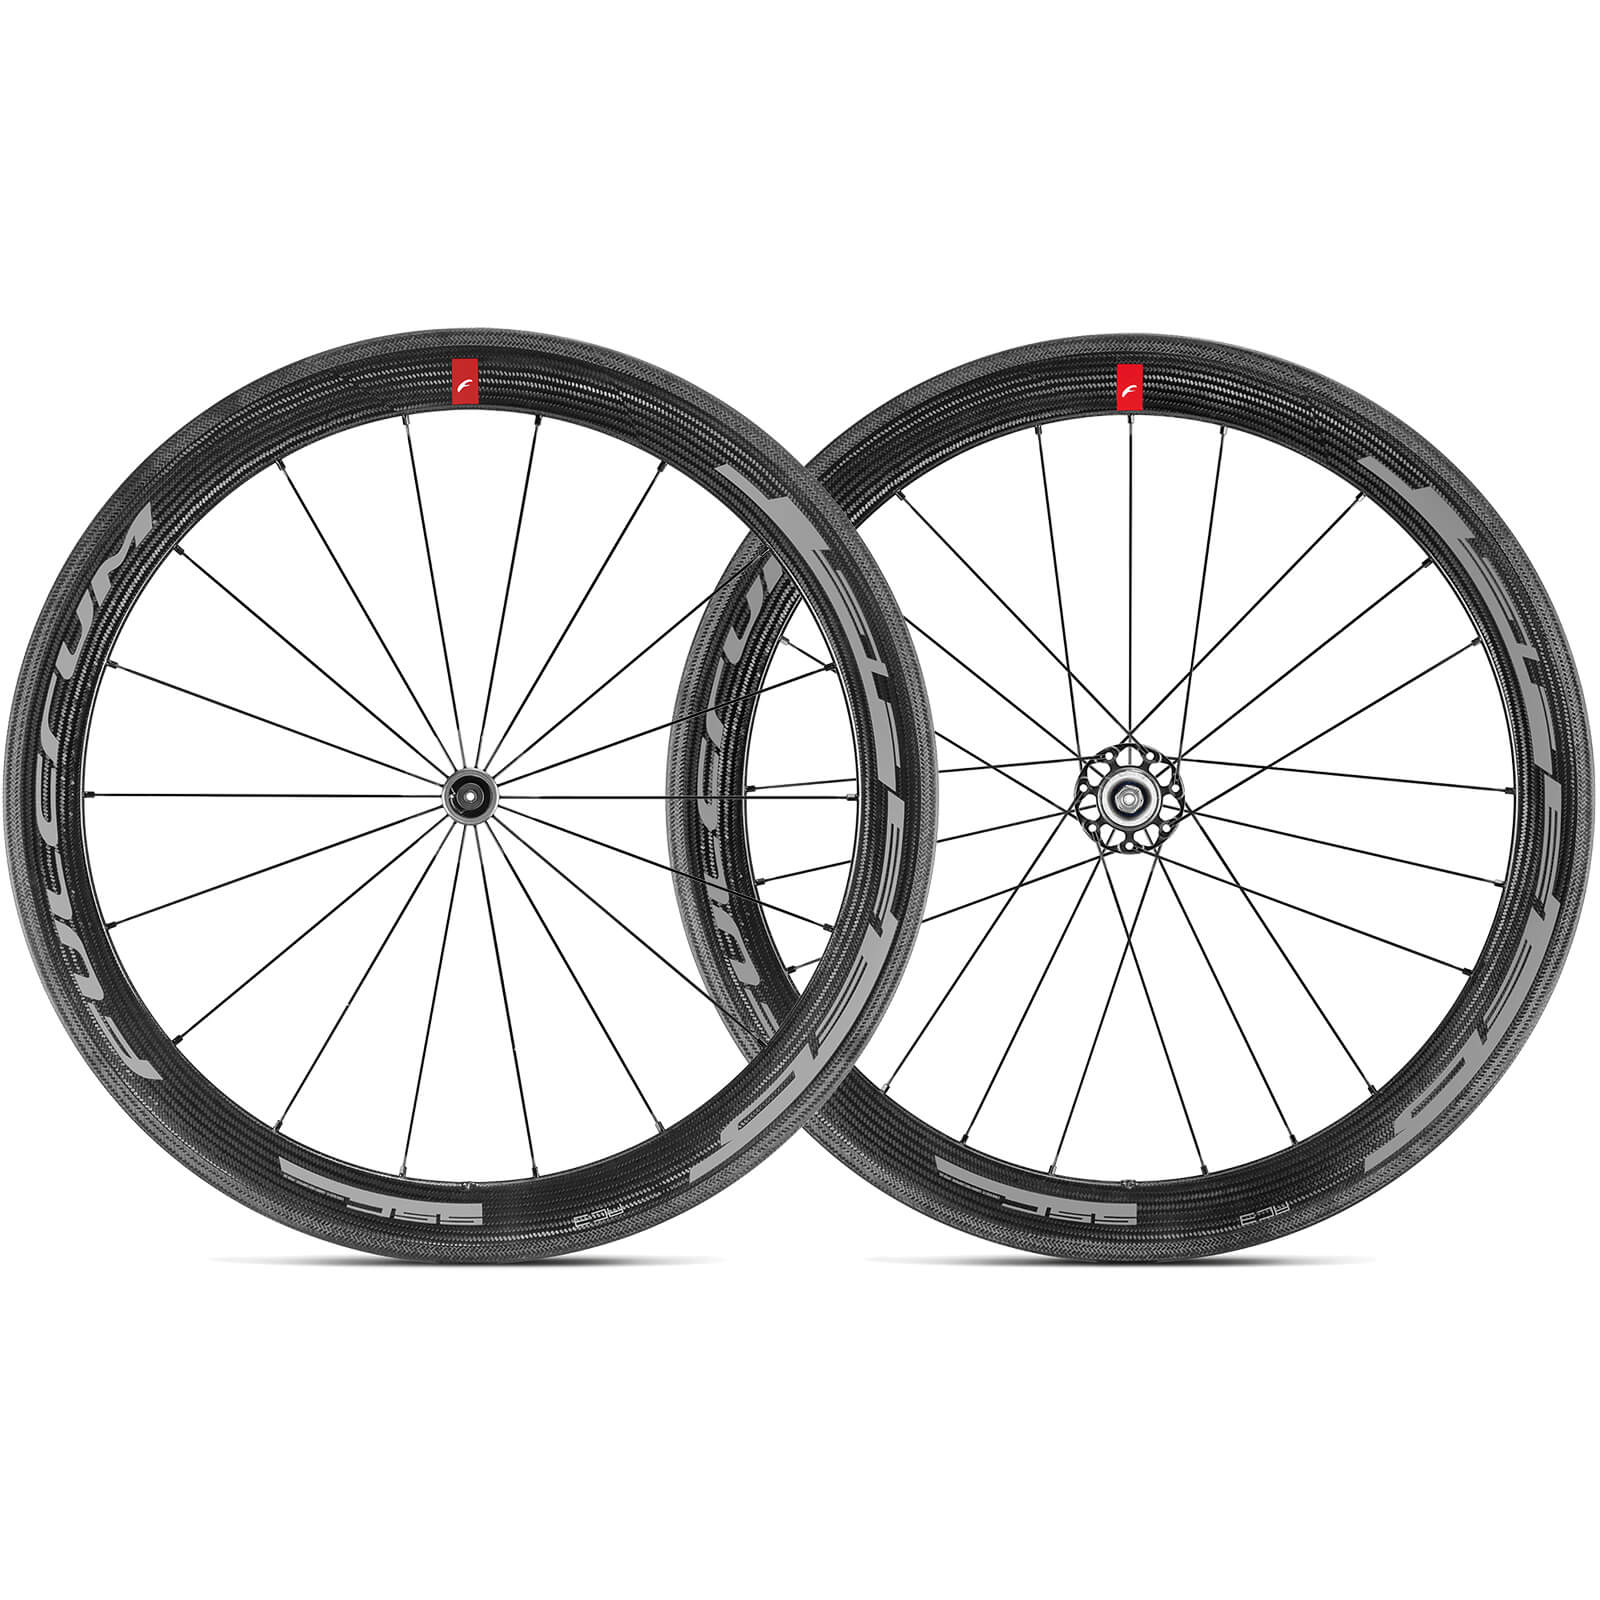 Image of Fulcrum Racing Speed 55C C17 Carbon Clincher Road Wheelset - Black / Shimano / Pair / 10-11 Speed / Clincher / 700c